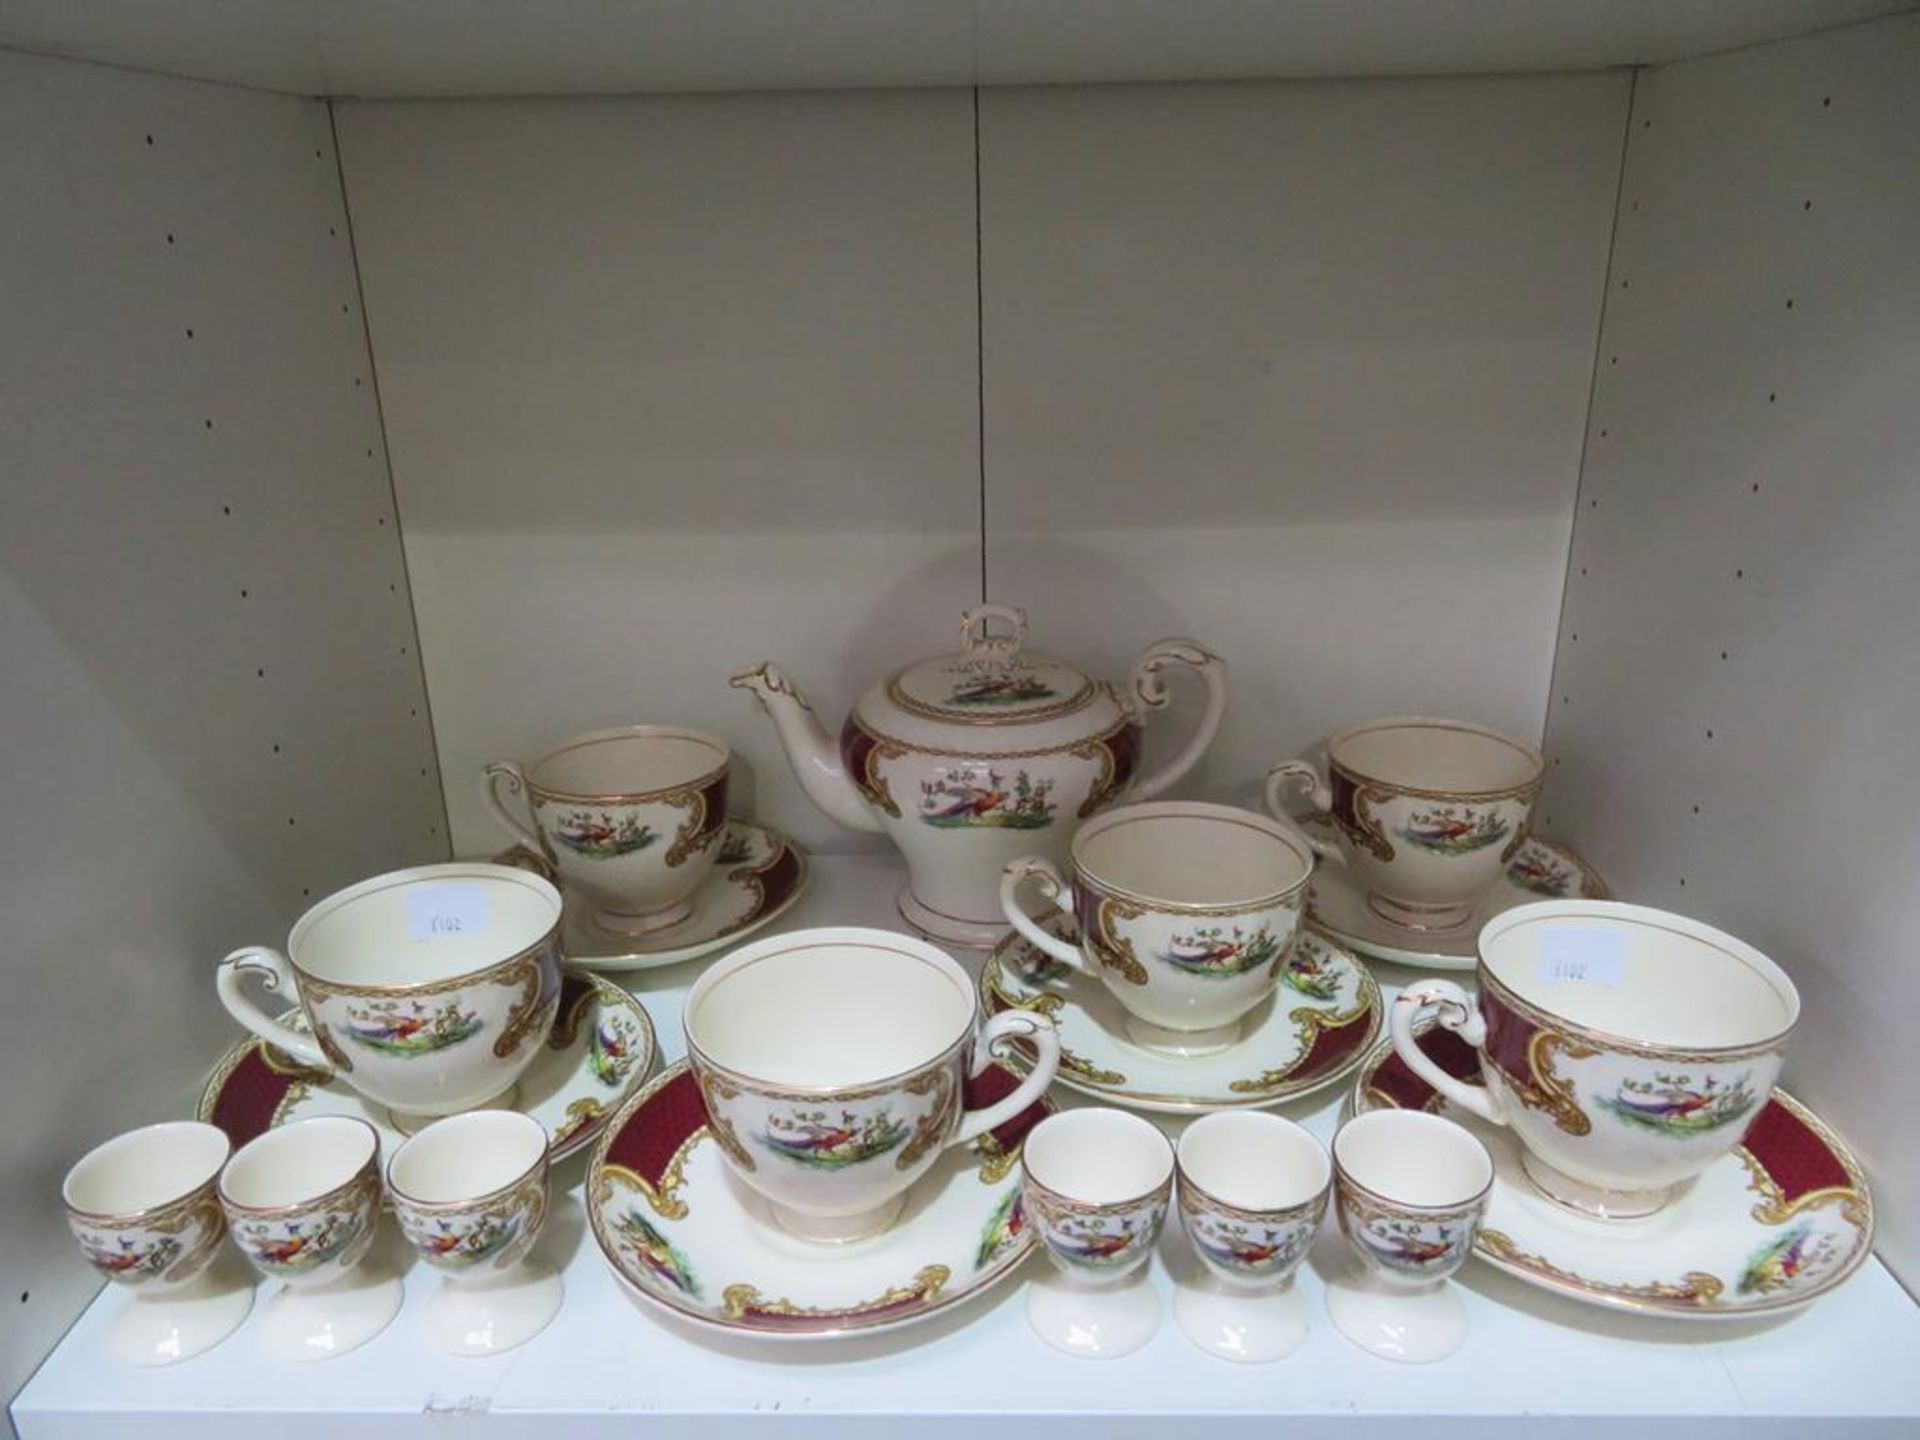 Over 30 pieces of Myott Staffordshire 'Red Chelsea - Image 3 of 3